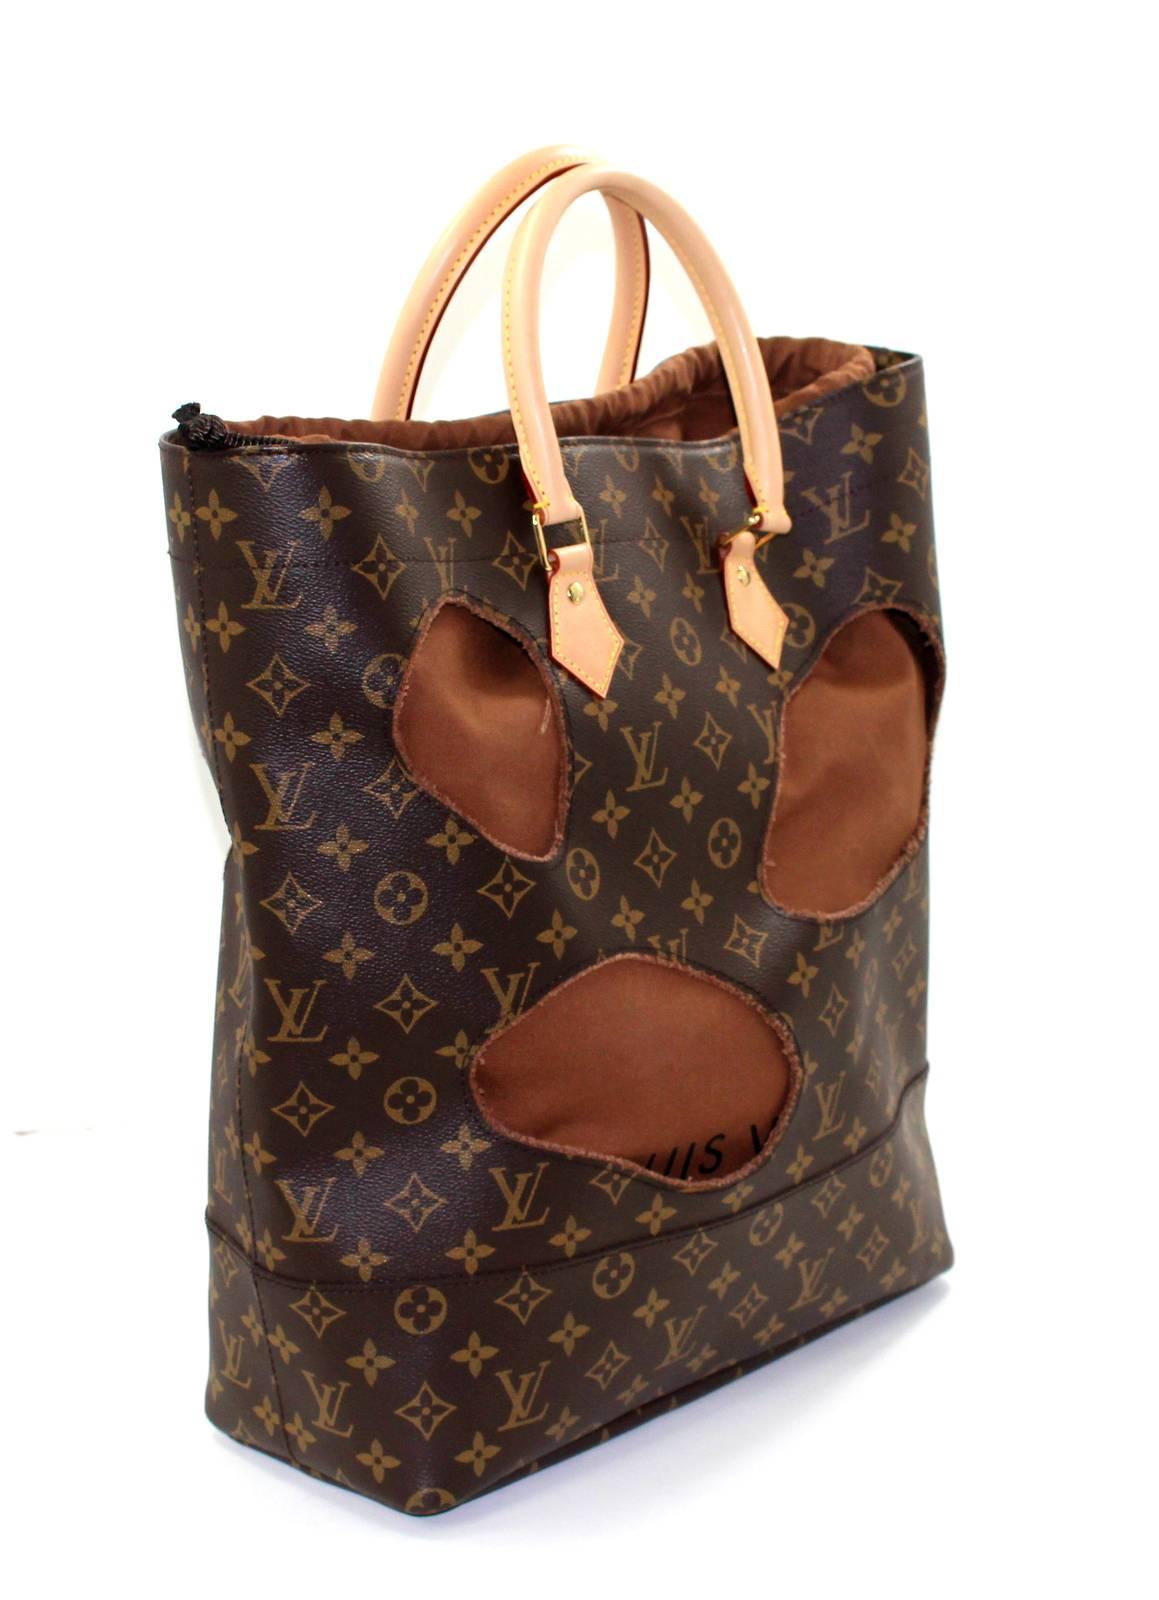 Louis Vuitton Kawakubo Runway Tote- Brand New, Pristine
Specially designed by Rei Kawakubo for the Celebrating Monogram collection, this rare piece is totally sold out everywhere.   
Brown and tan LV monogram canvas tote has large cut outs adding